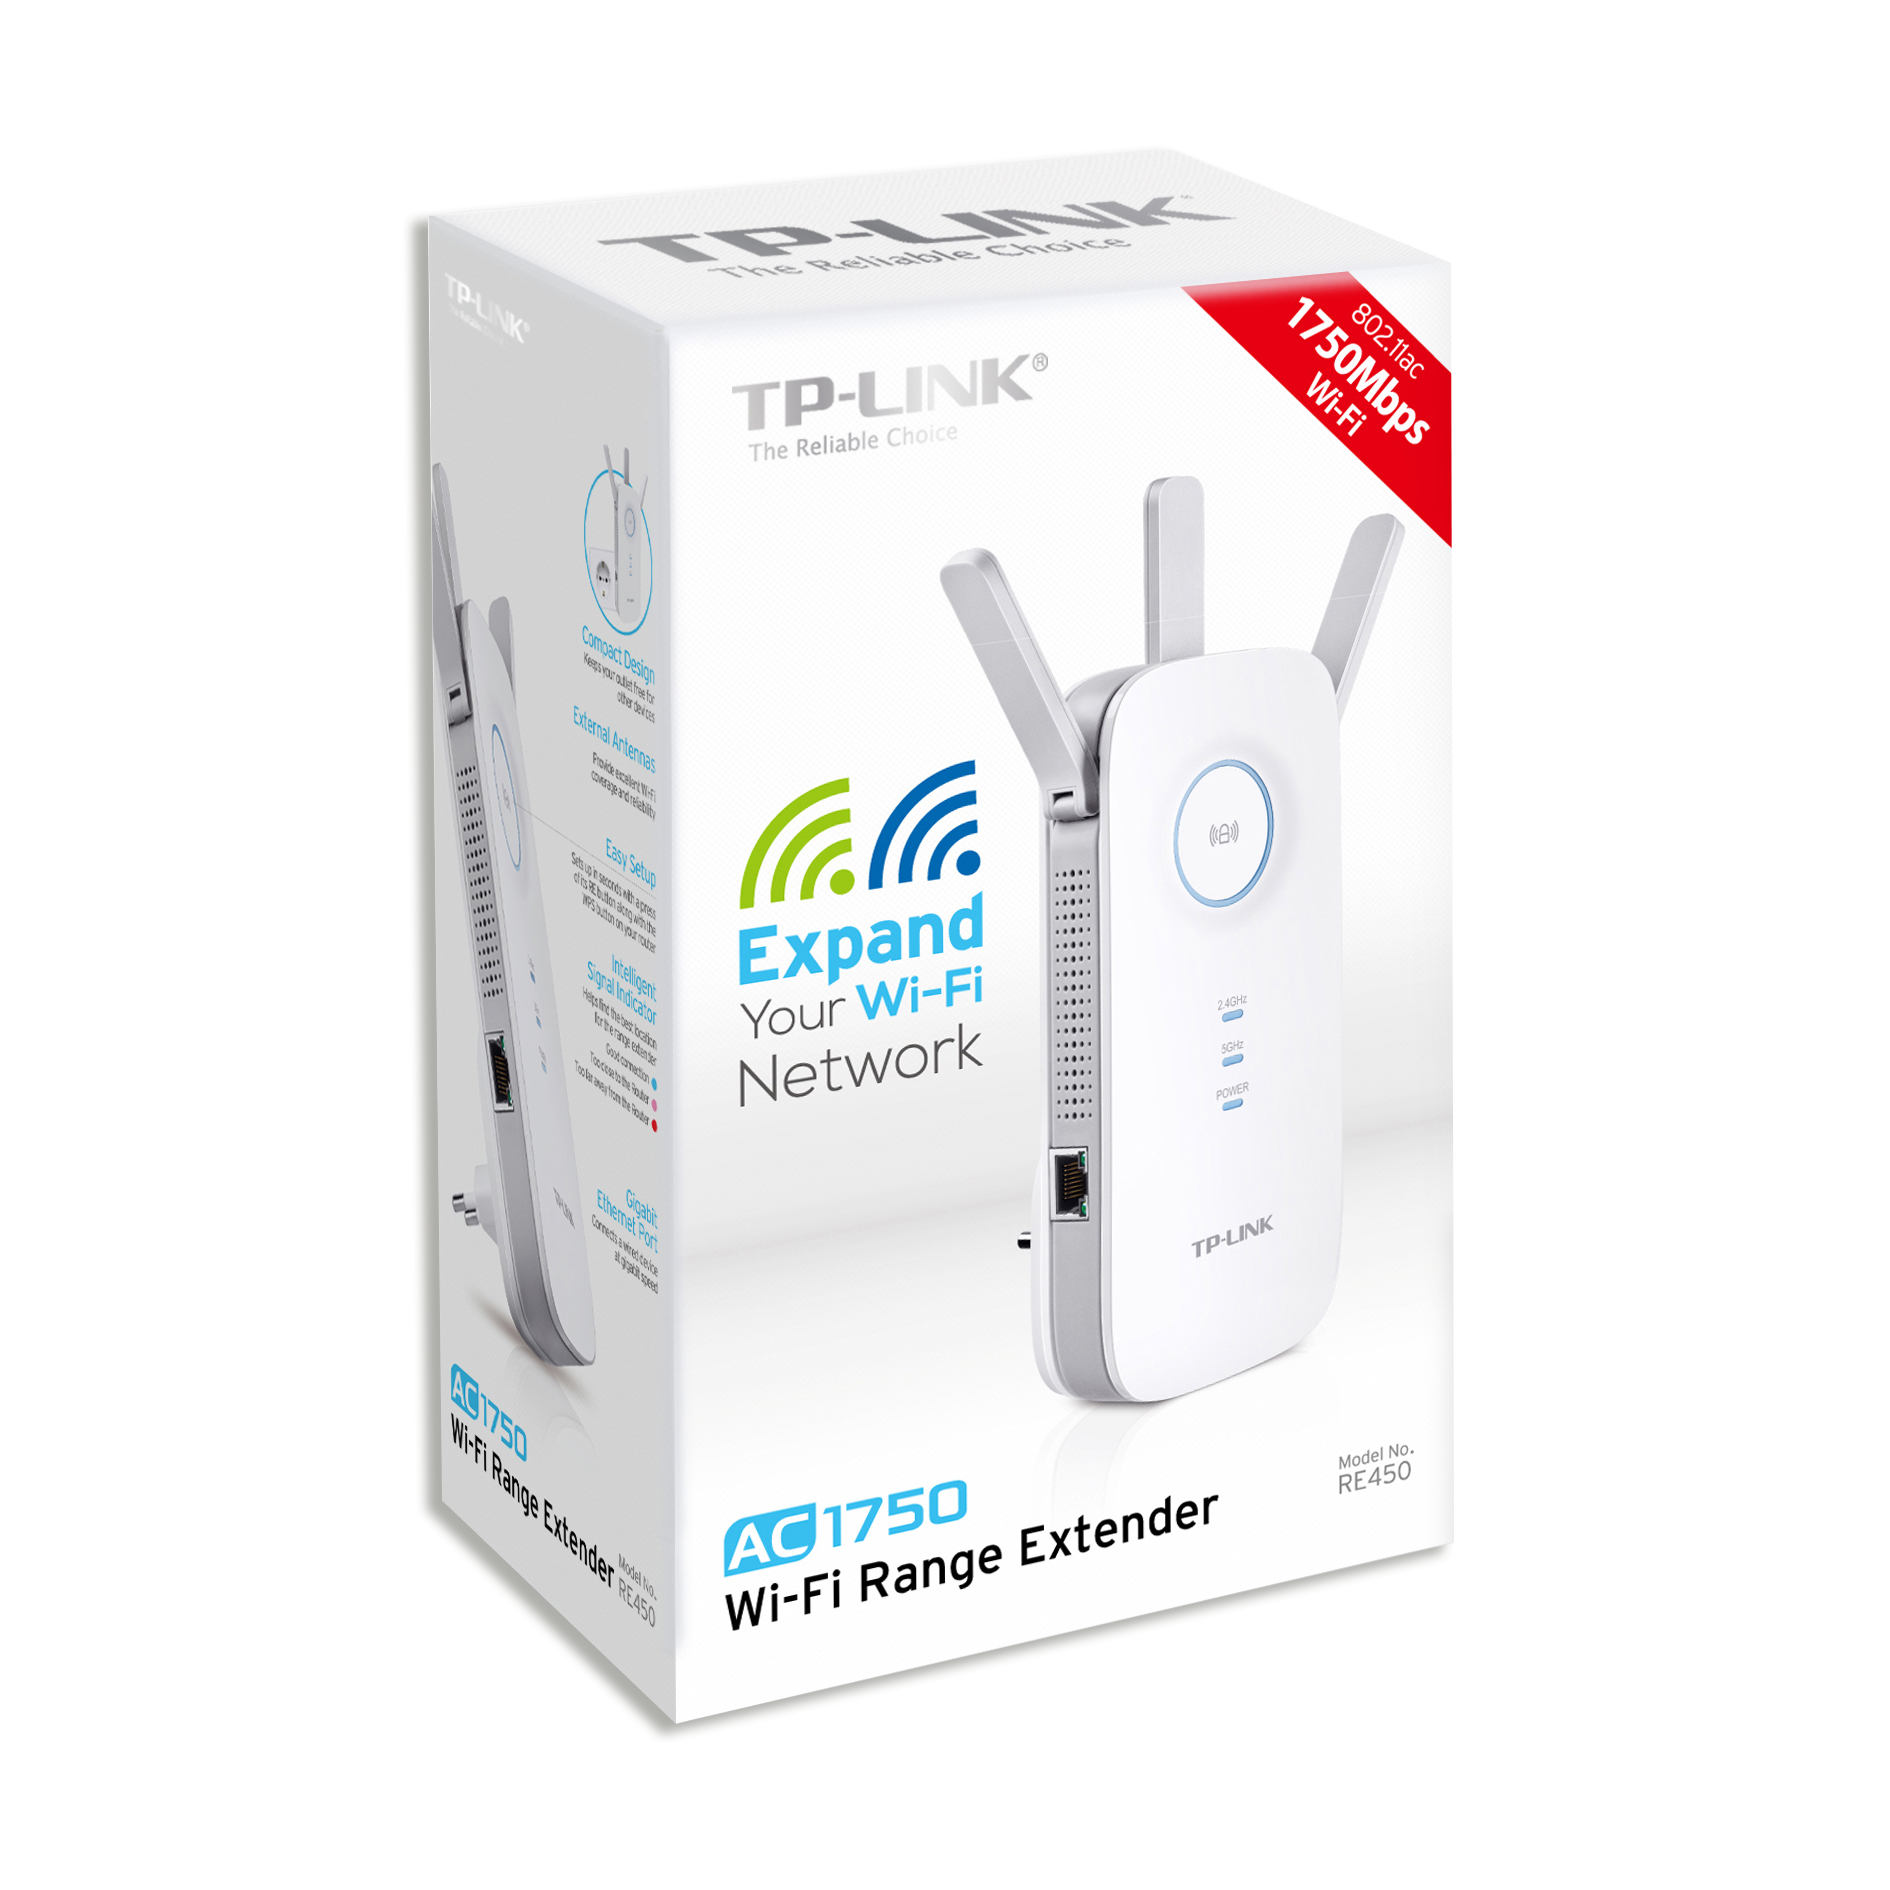 TP-LINK Dual Band WLAN Repeater RE450 AC1750 AC1750